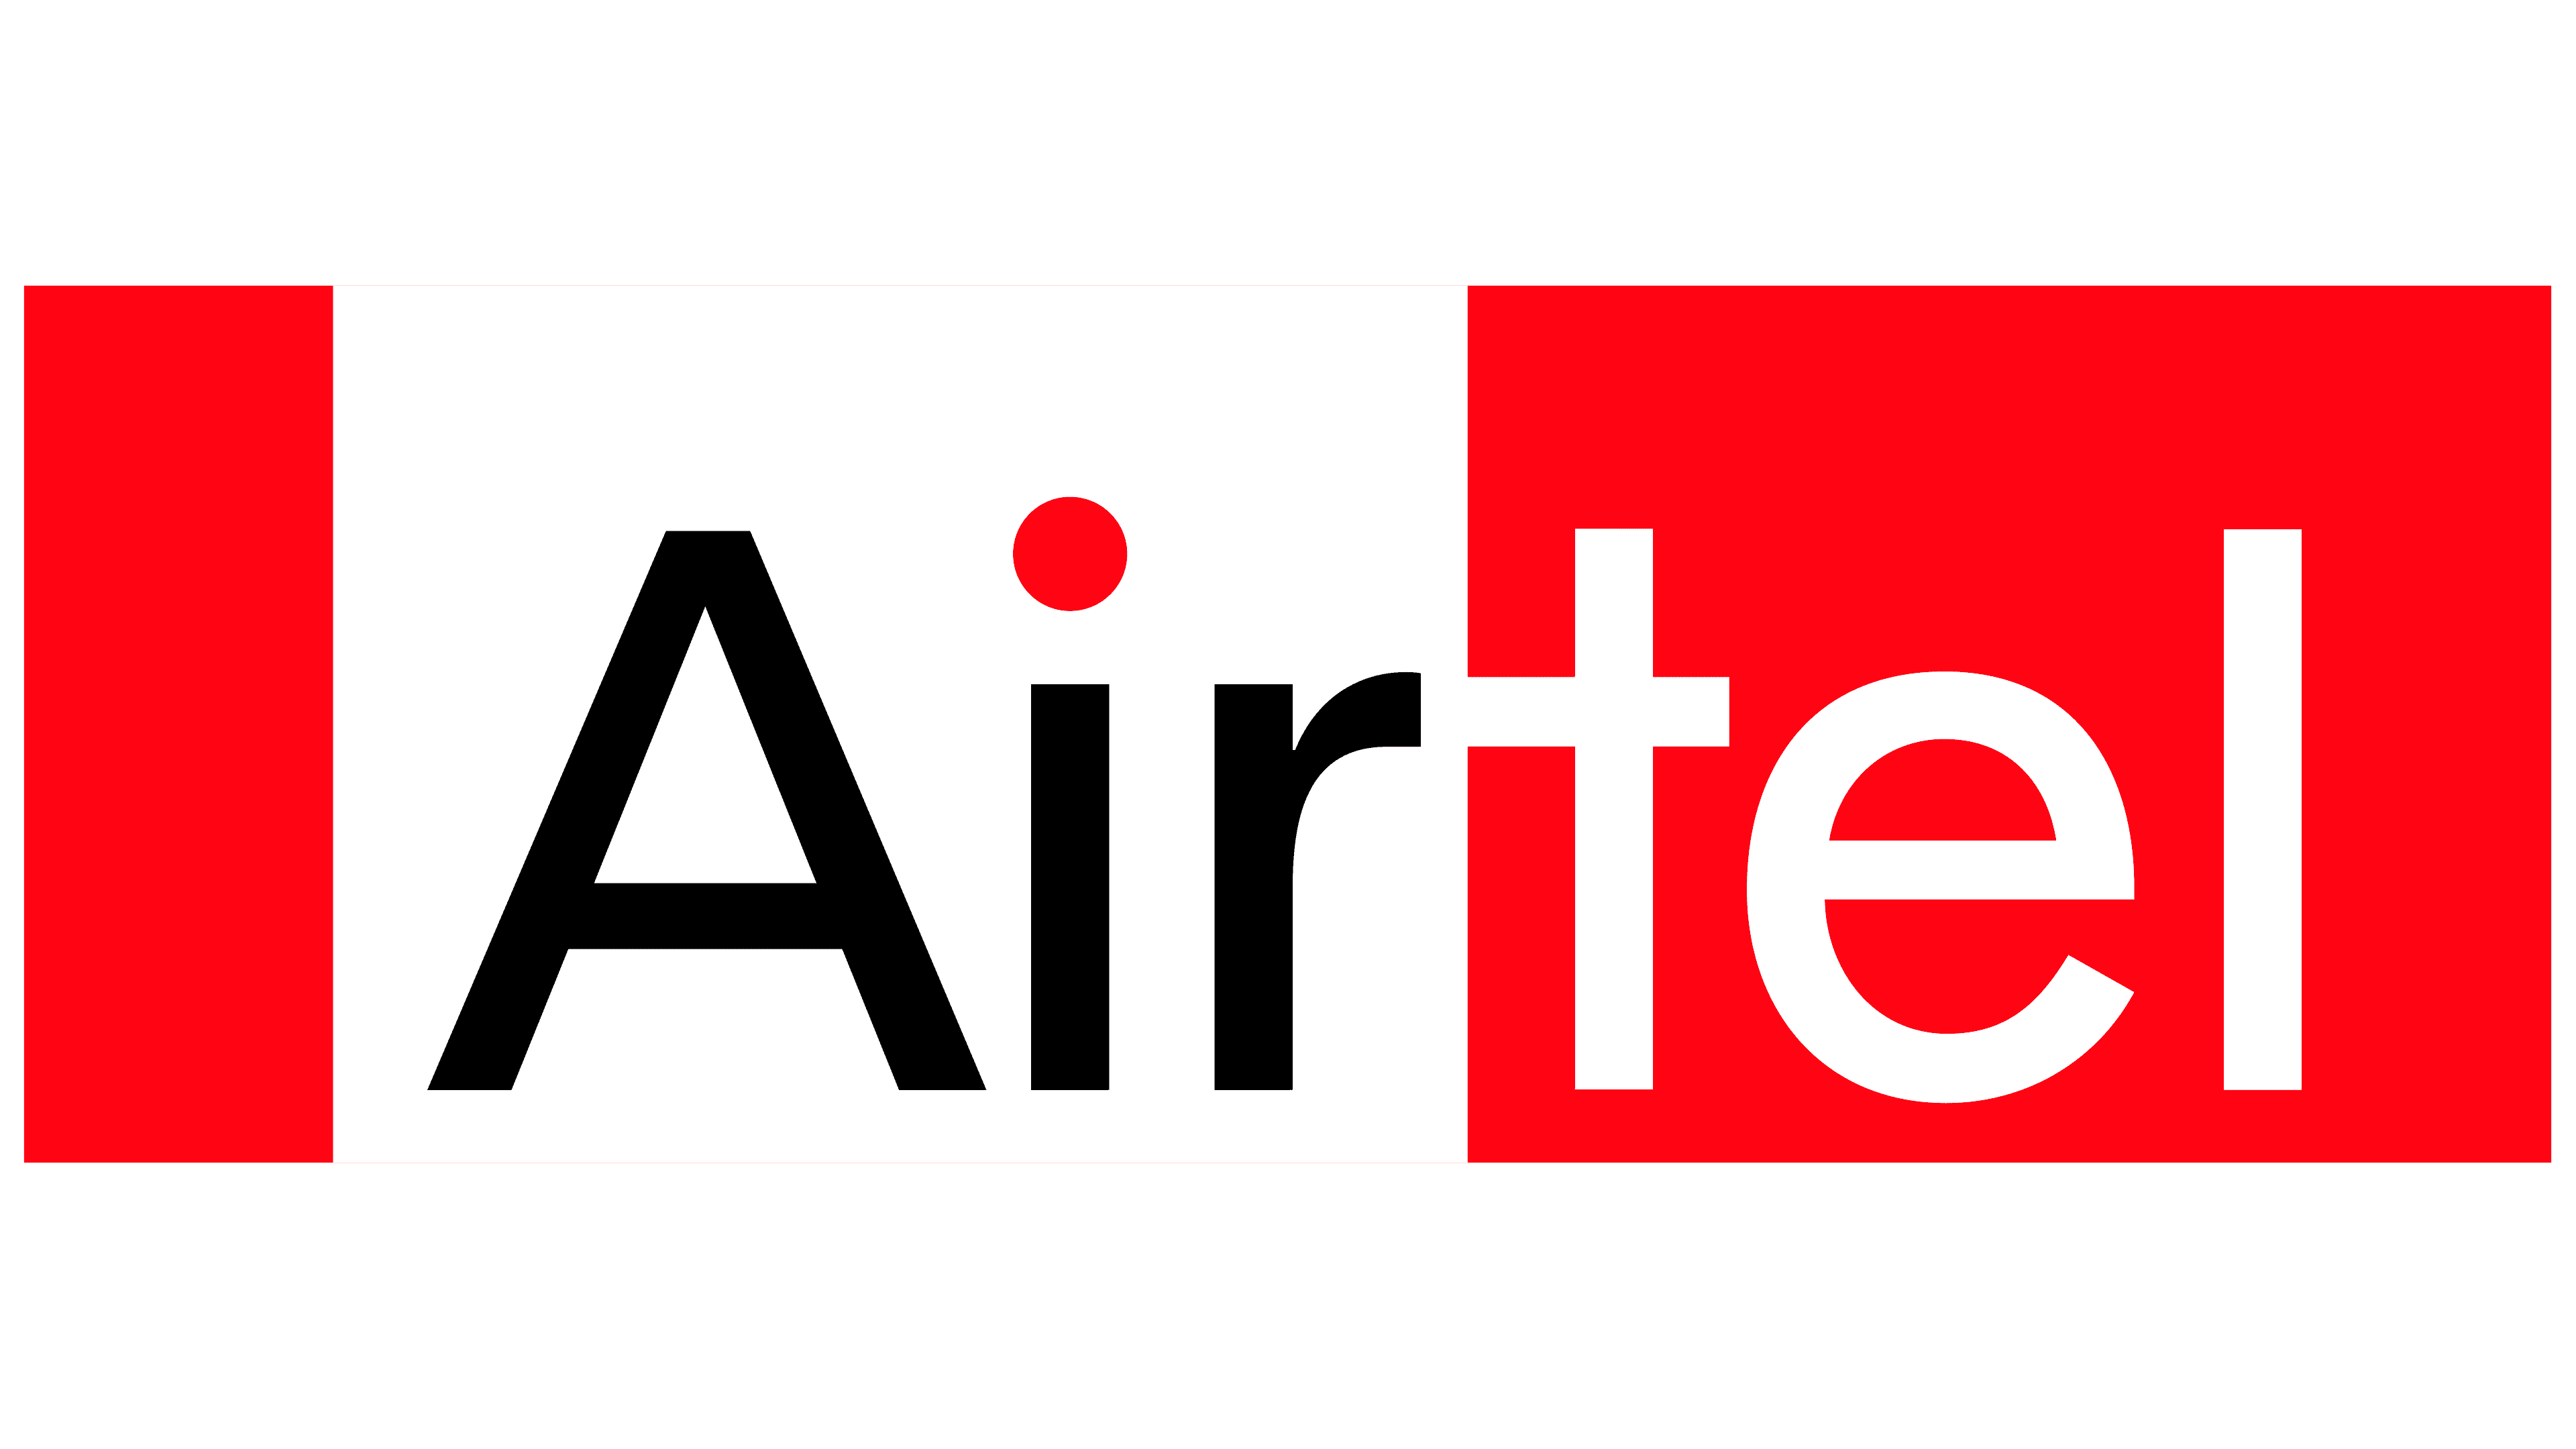 Airtel Green Trade: Unraveling the Rs 8,286 Cr Block Deal